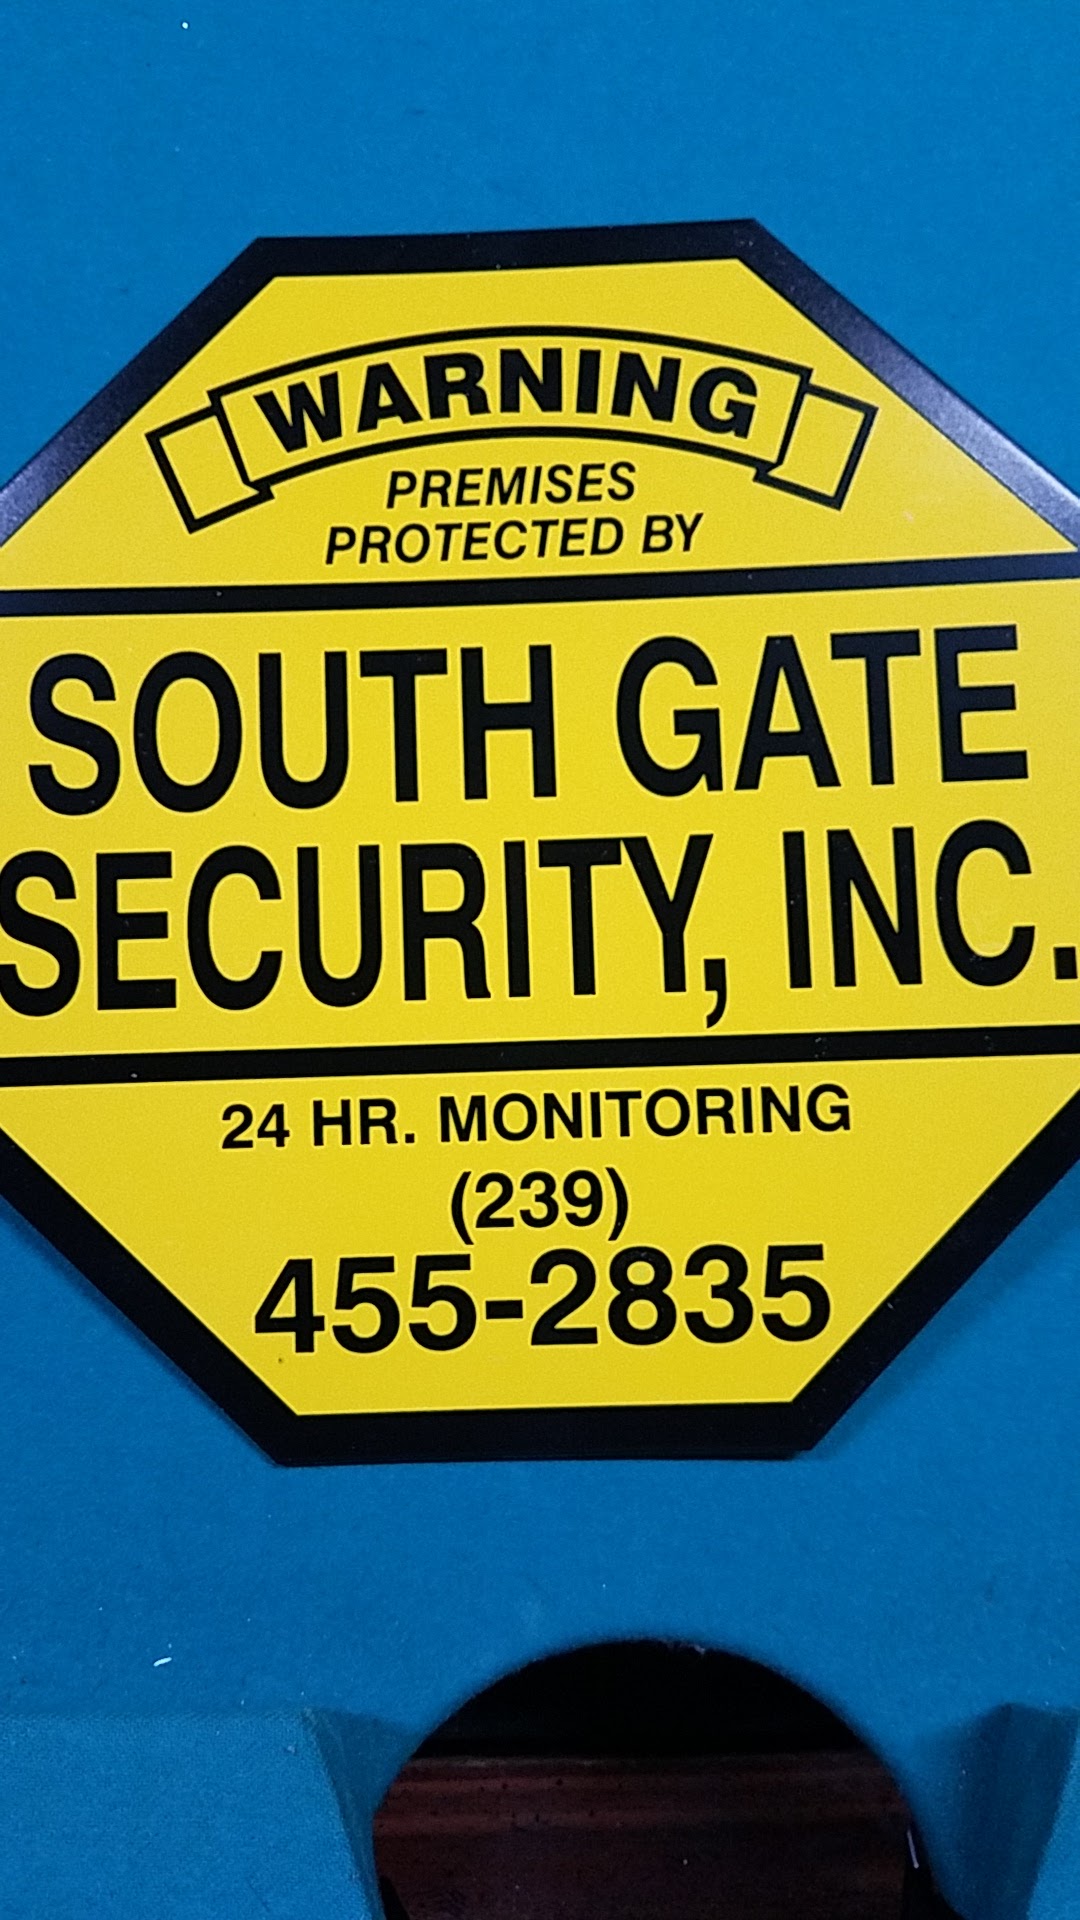 South Gate Security